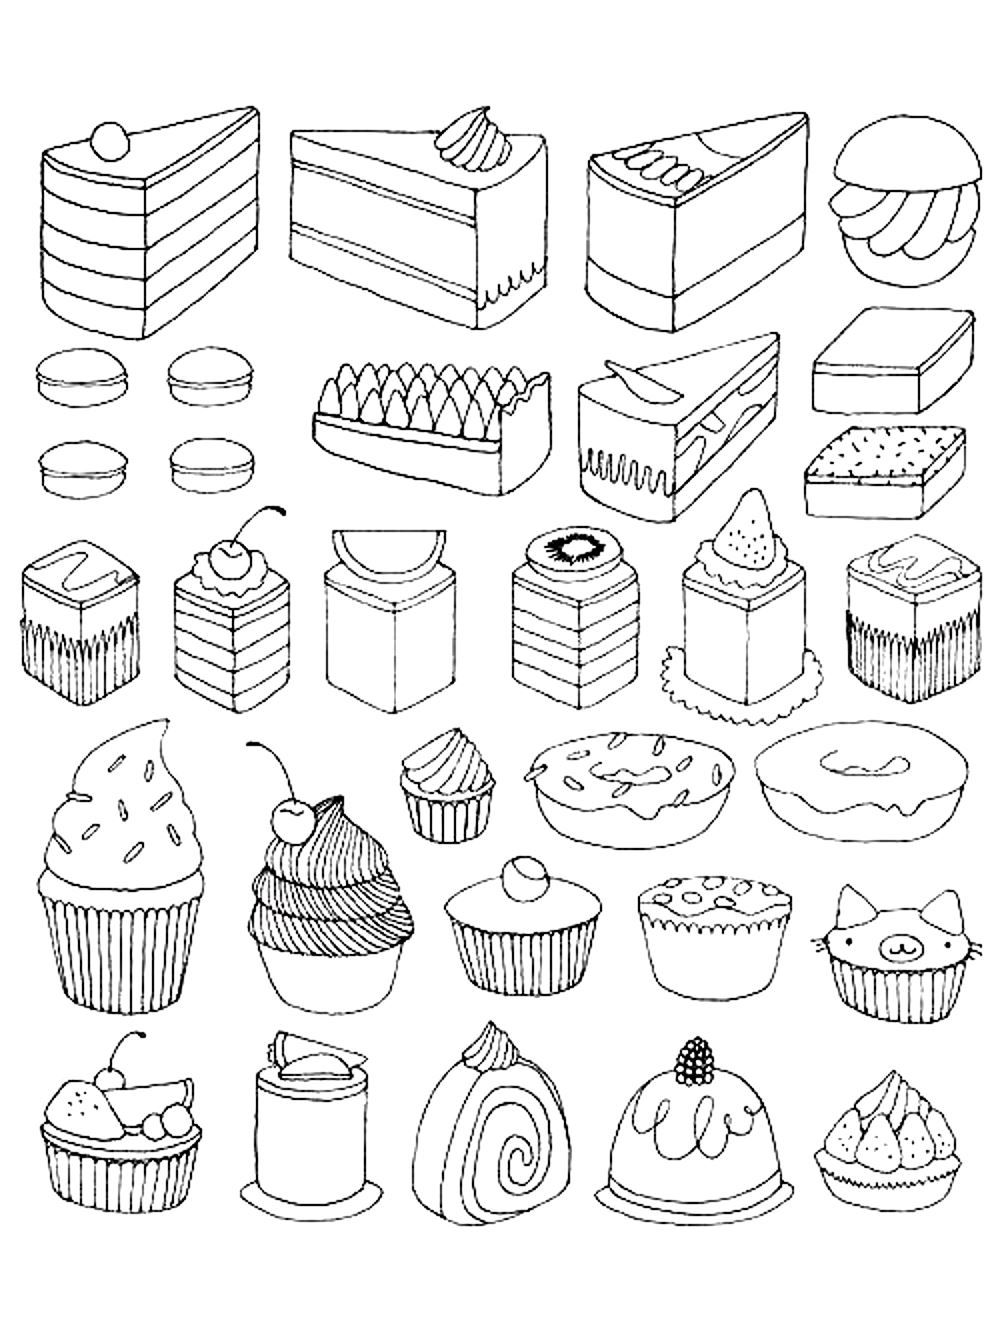 Cup Cakes - Coloring Pages for adults